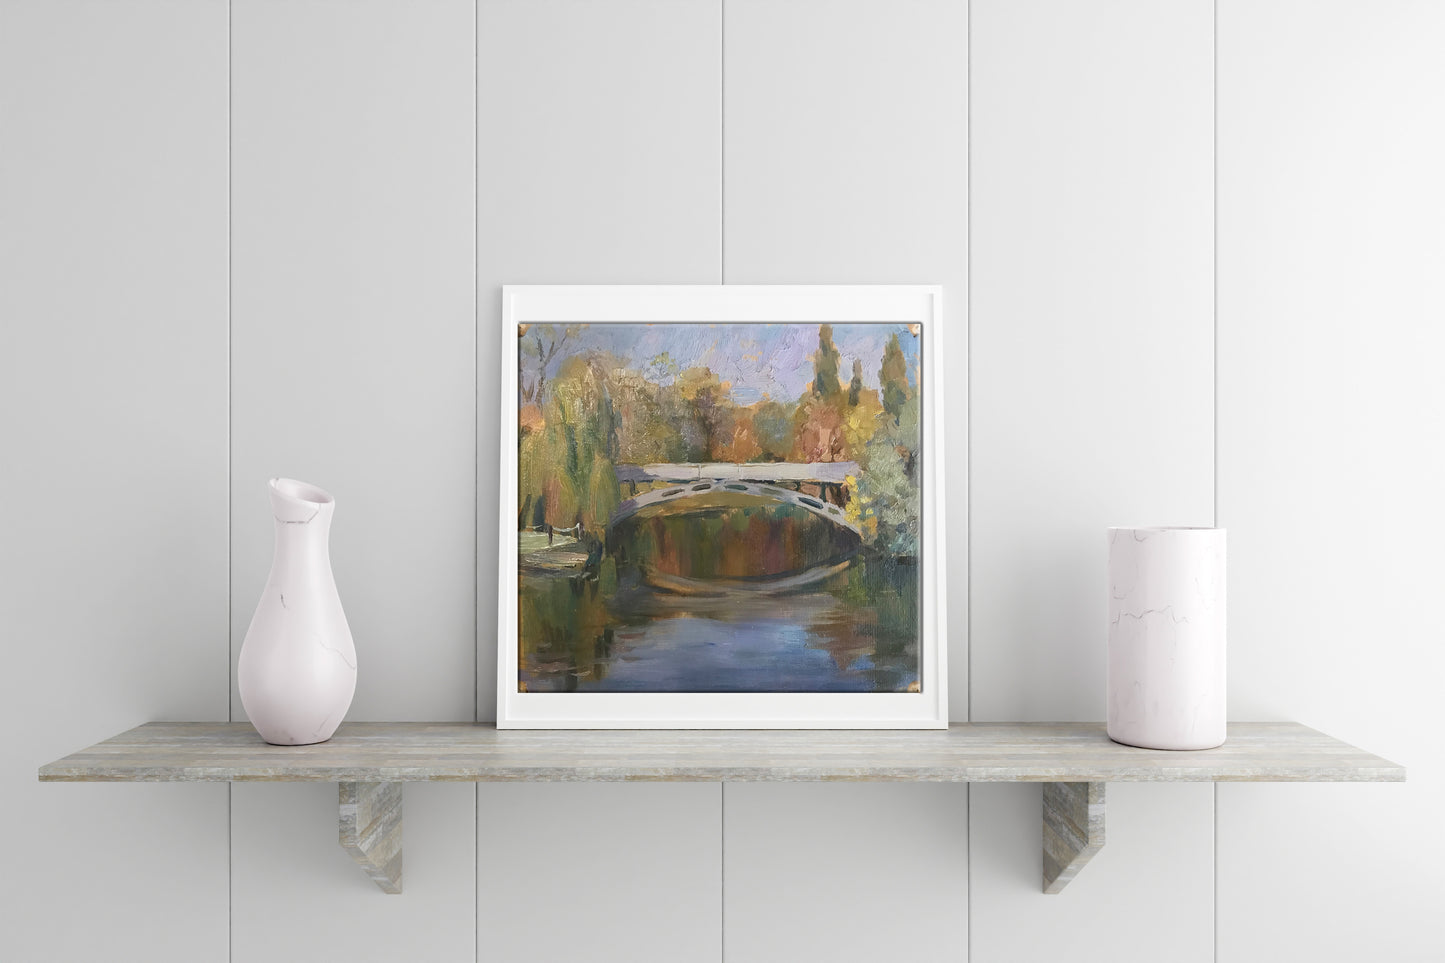 The artwork showcases a bridge stretching across a flowing river, with meticulous detail